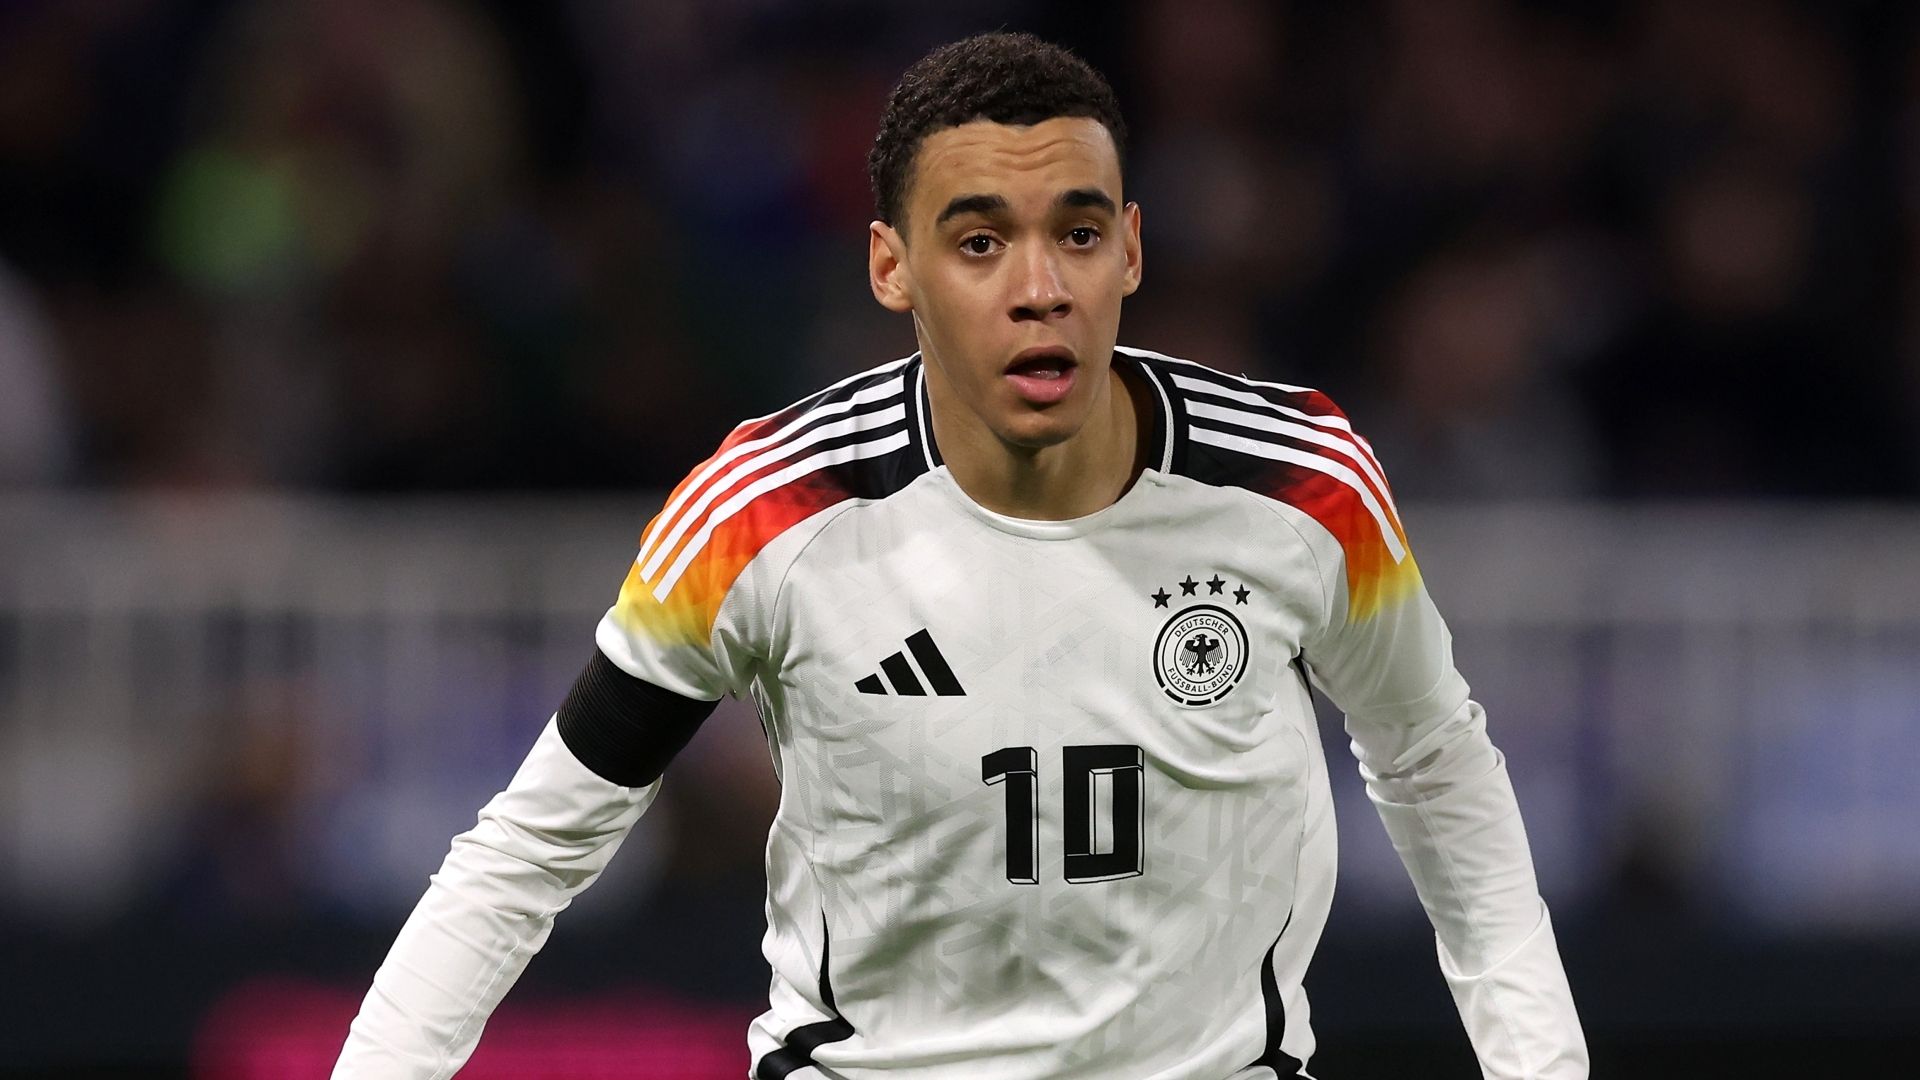 Germany vs Netherlands: Live stream, TV channel, kick-off time & where to watch | Goal.com US